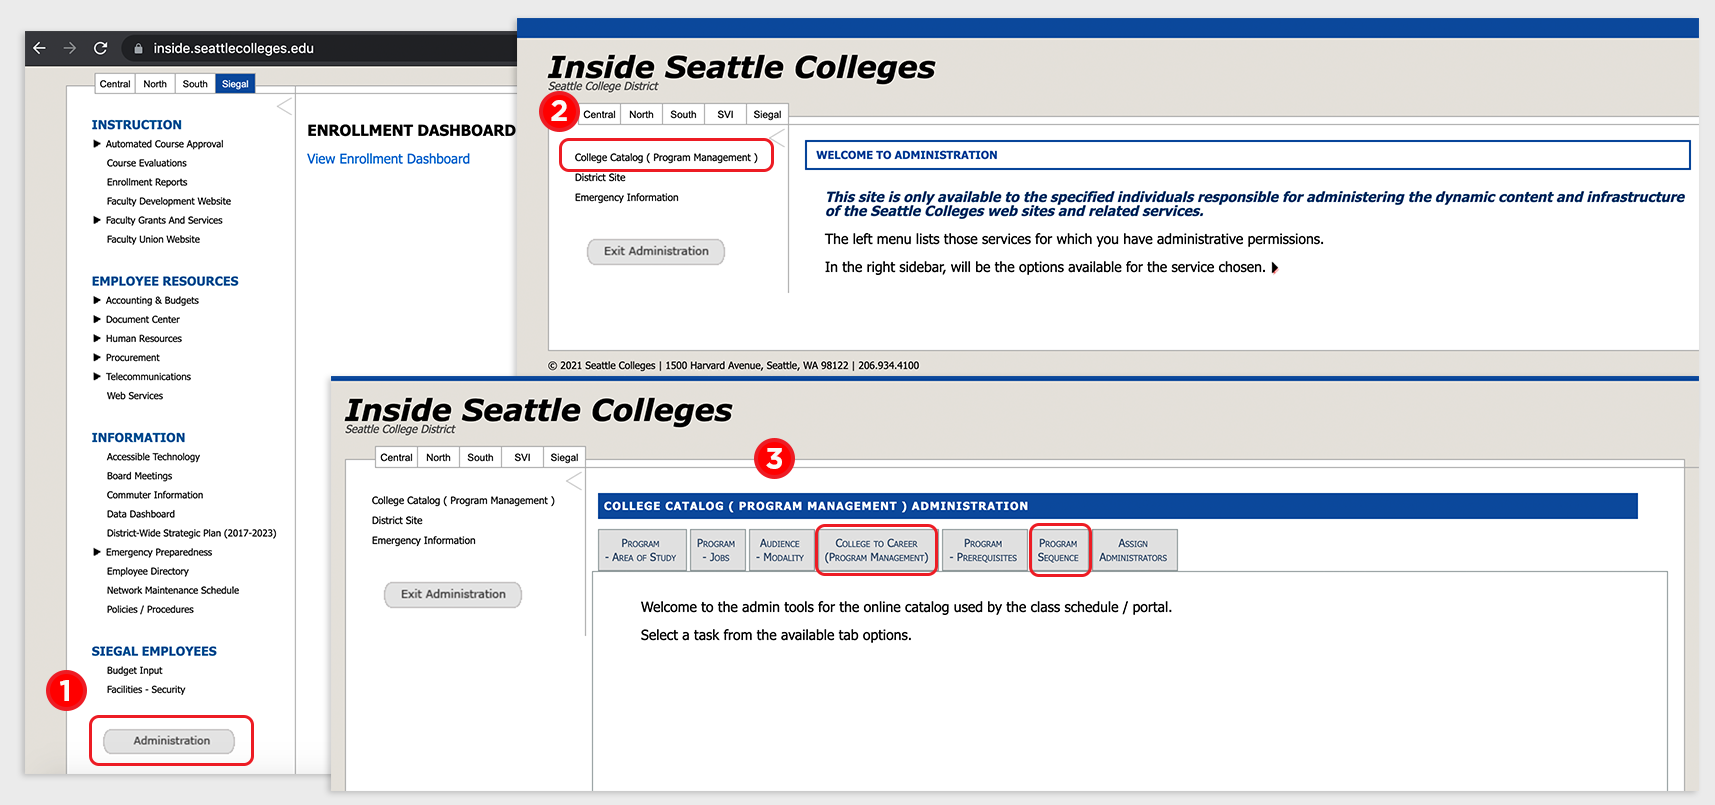 Log in to inside seattle colleges